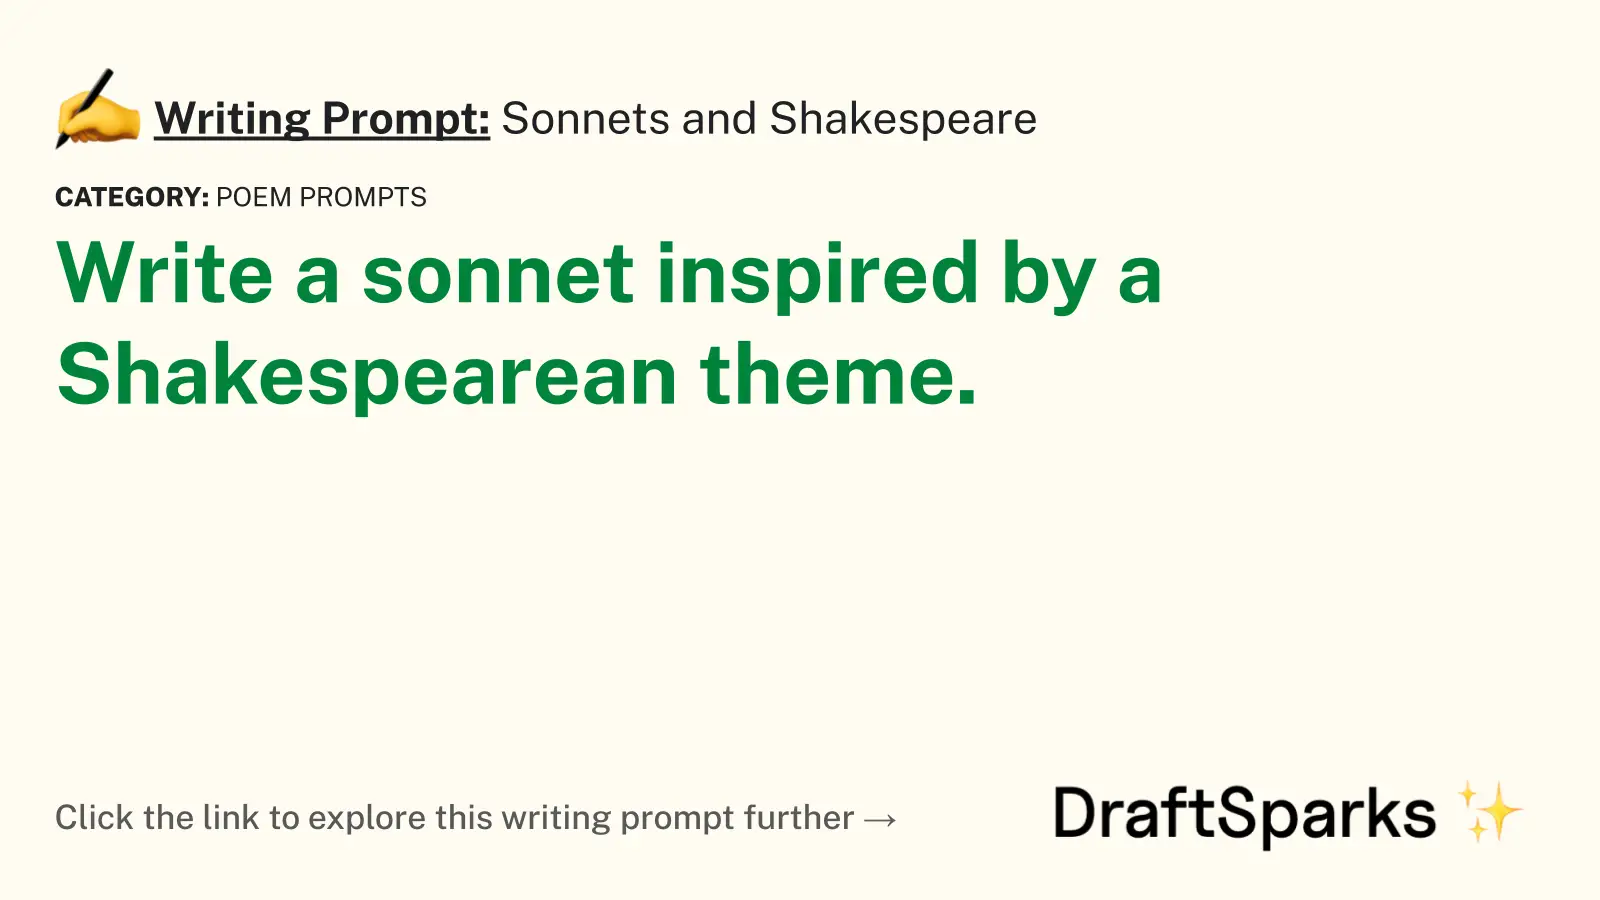 Sonnets and Shakespeare